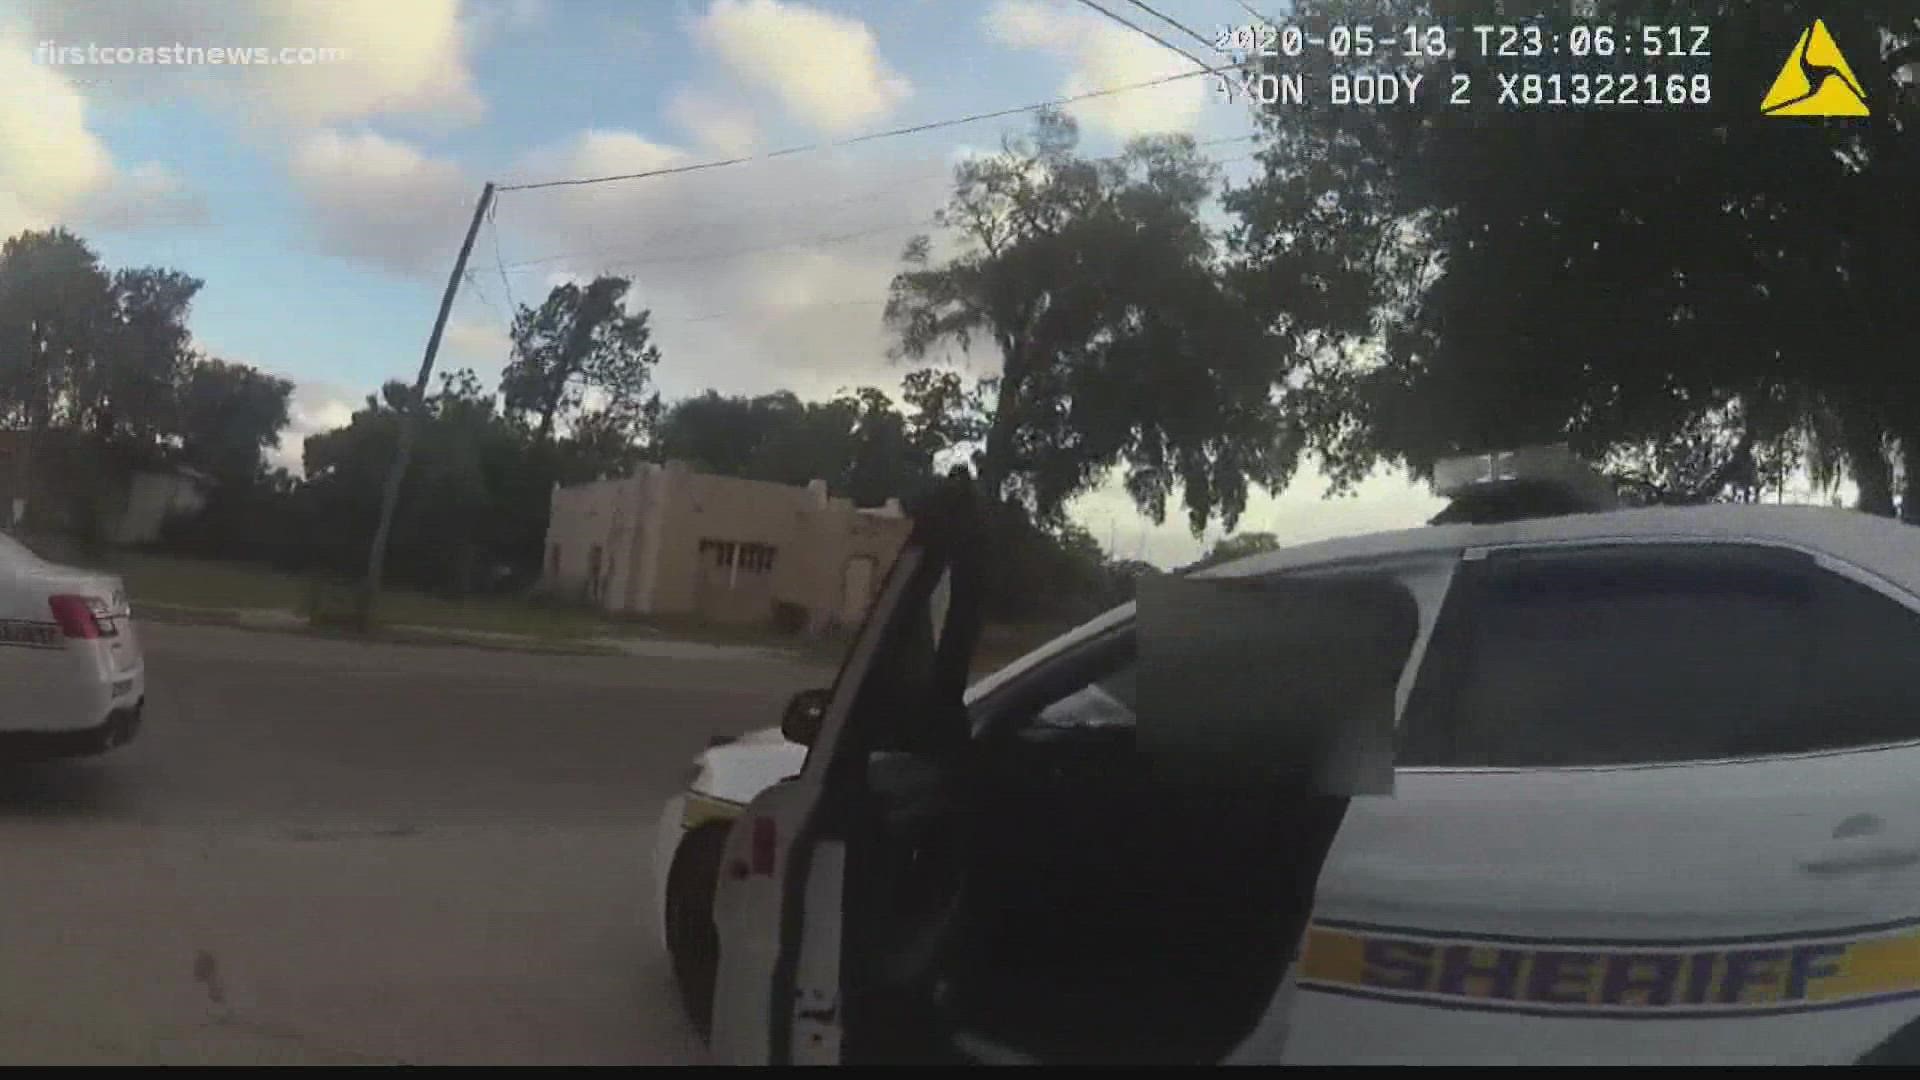 An officer parked in Brittany Williams driveway in May 2020 to check emails. She asked him to leave. He refused. A scuffle ensued and she was arrested.